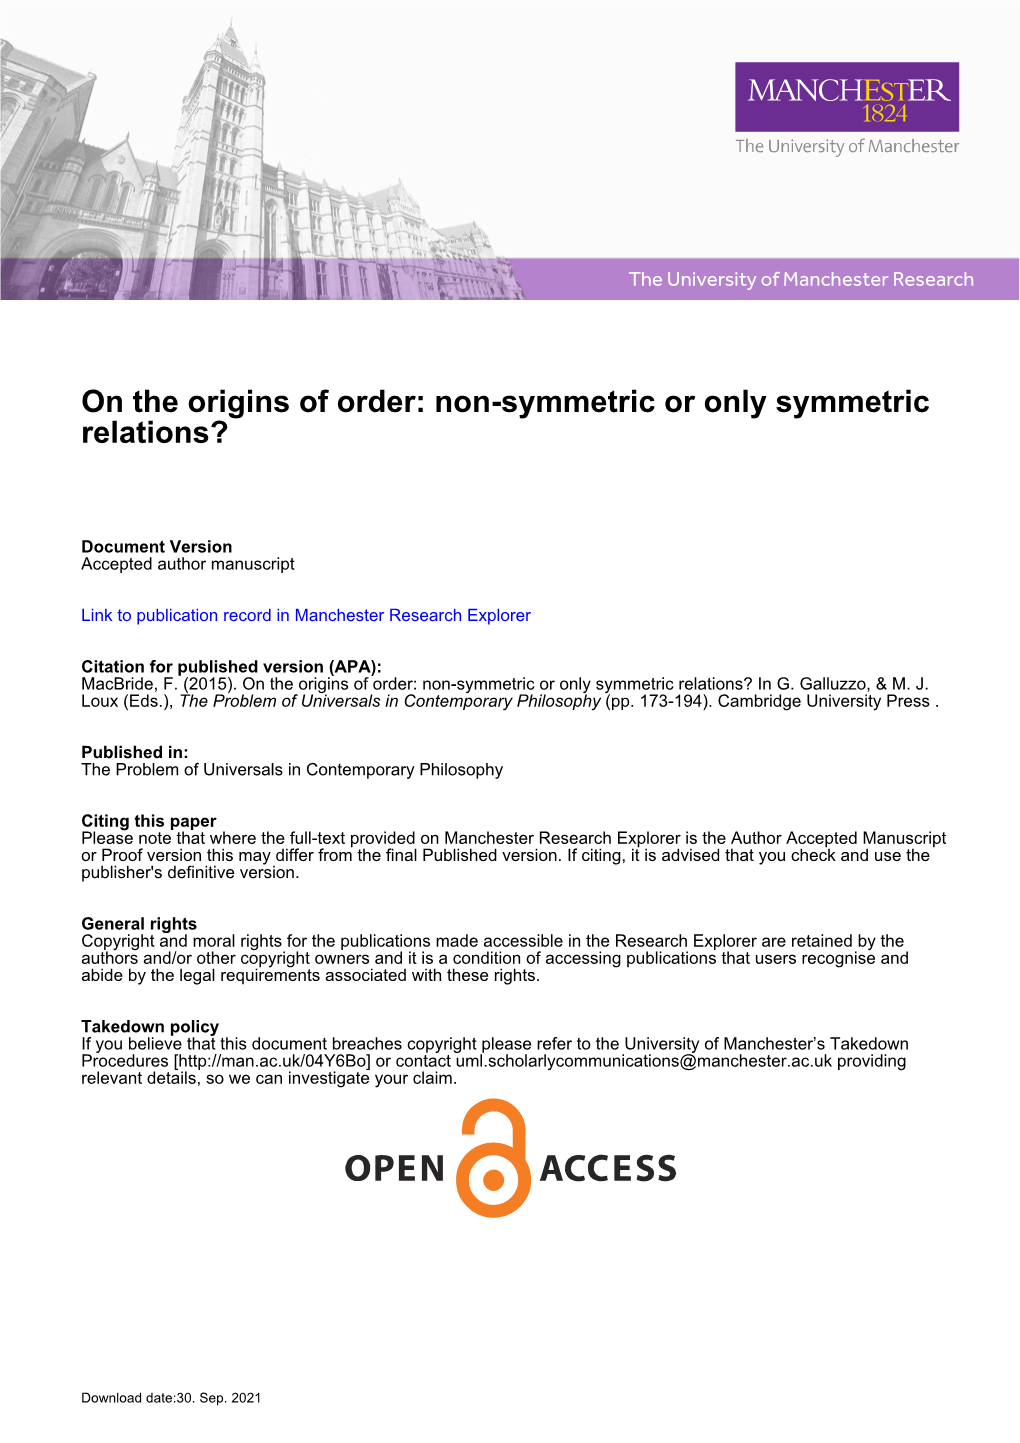 On the Origins of Order: Non-Symmetric Or Only Symmetric Relations?